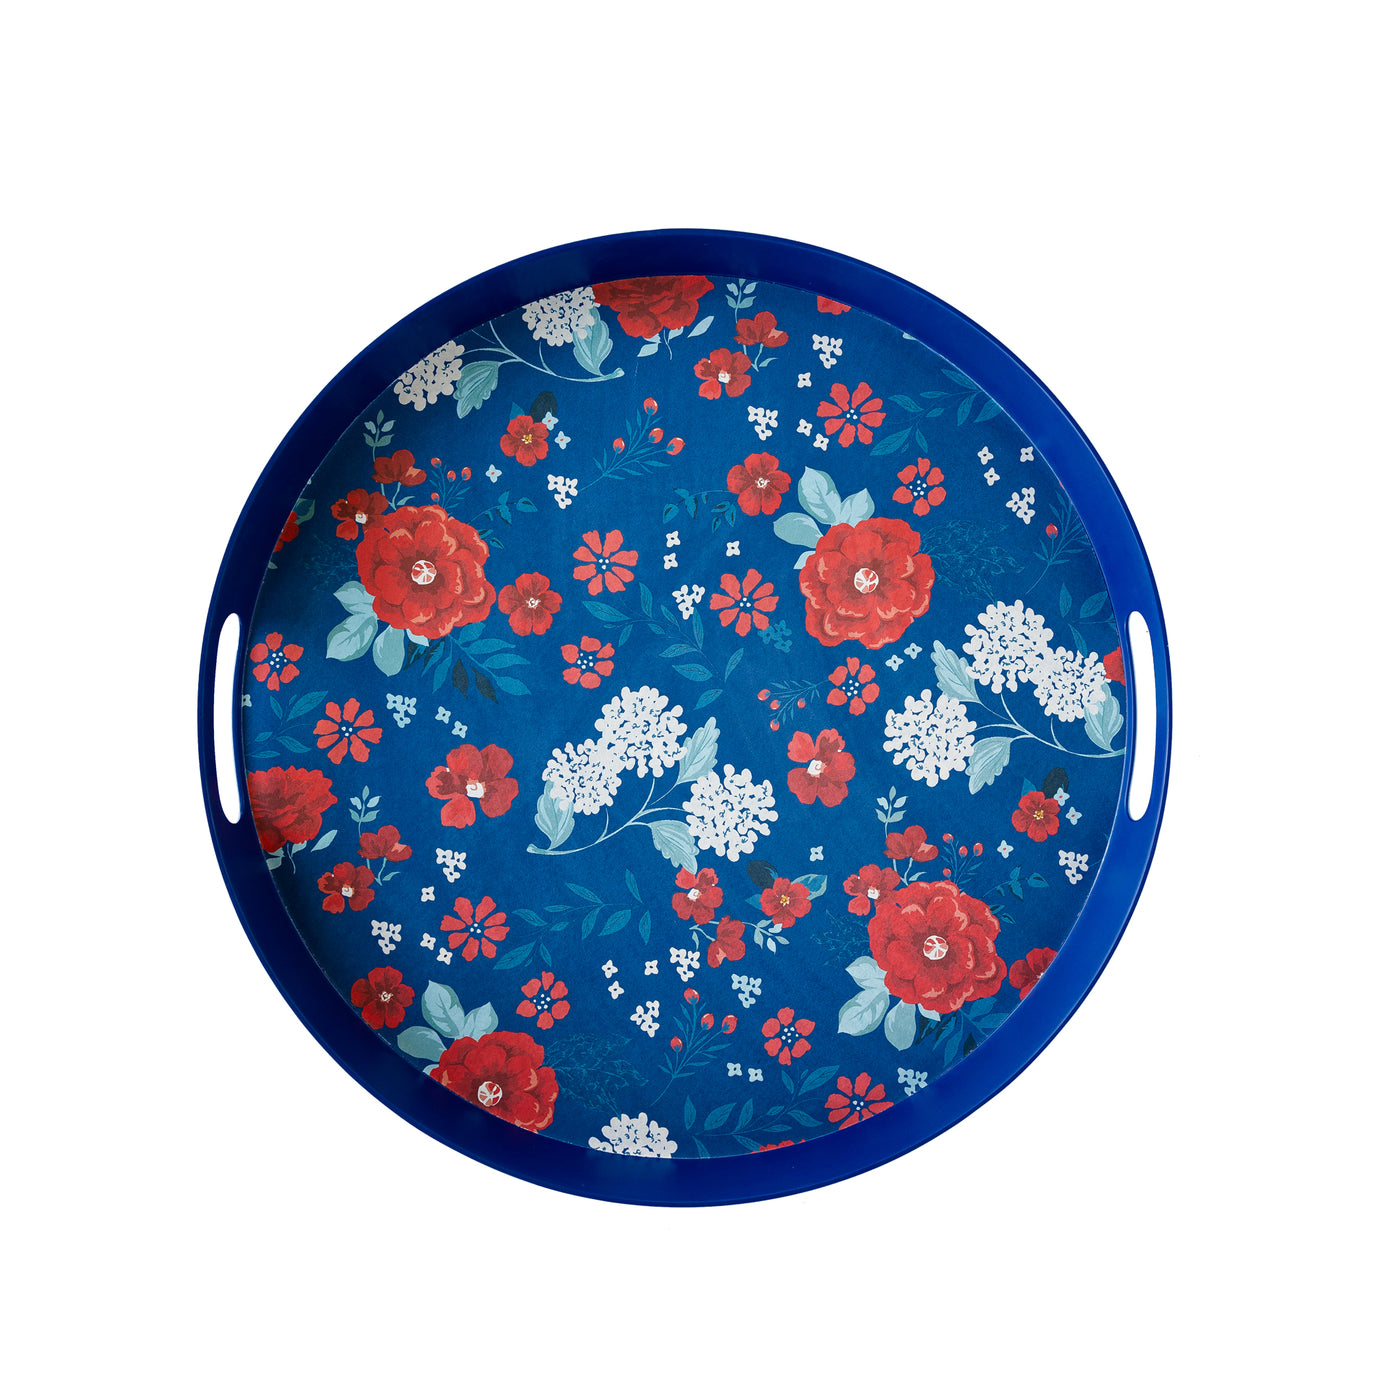 Red/White/Blue Floral Reusable Bamboo Round Serving Tray